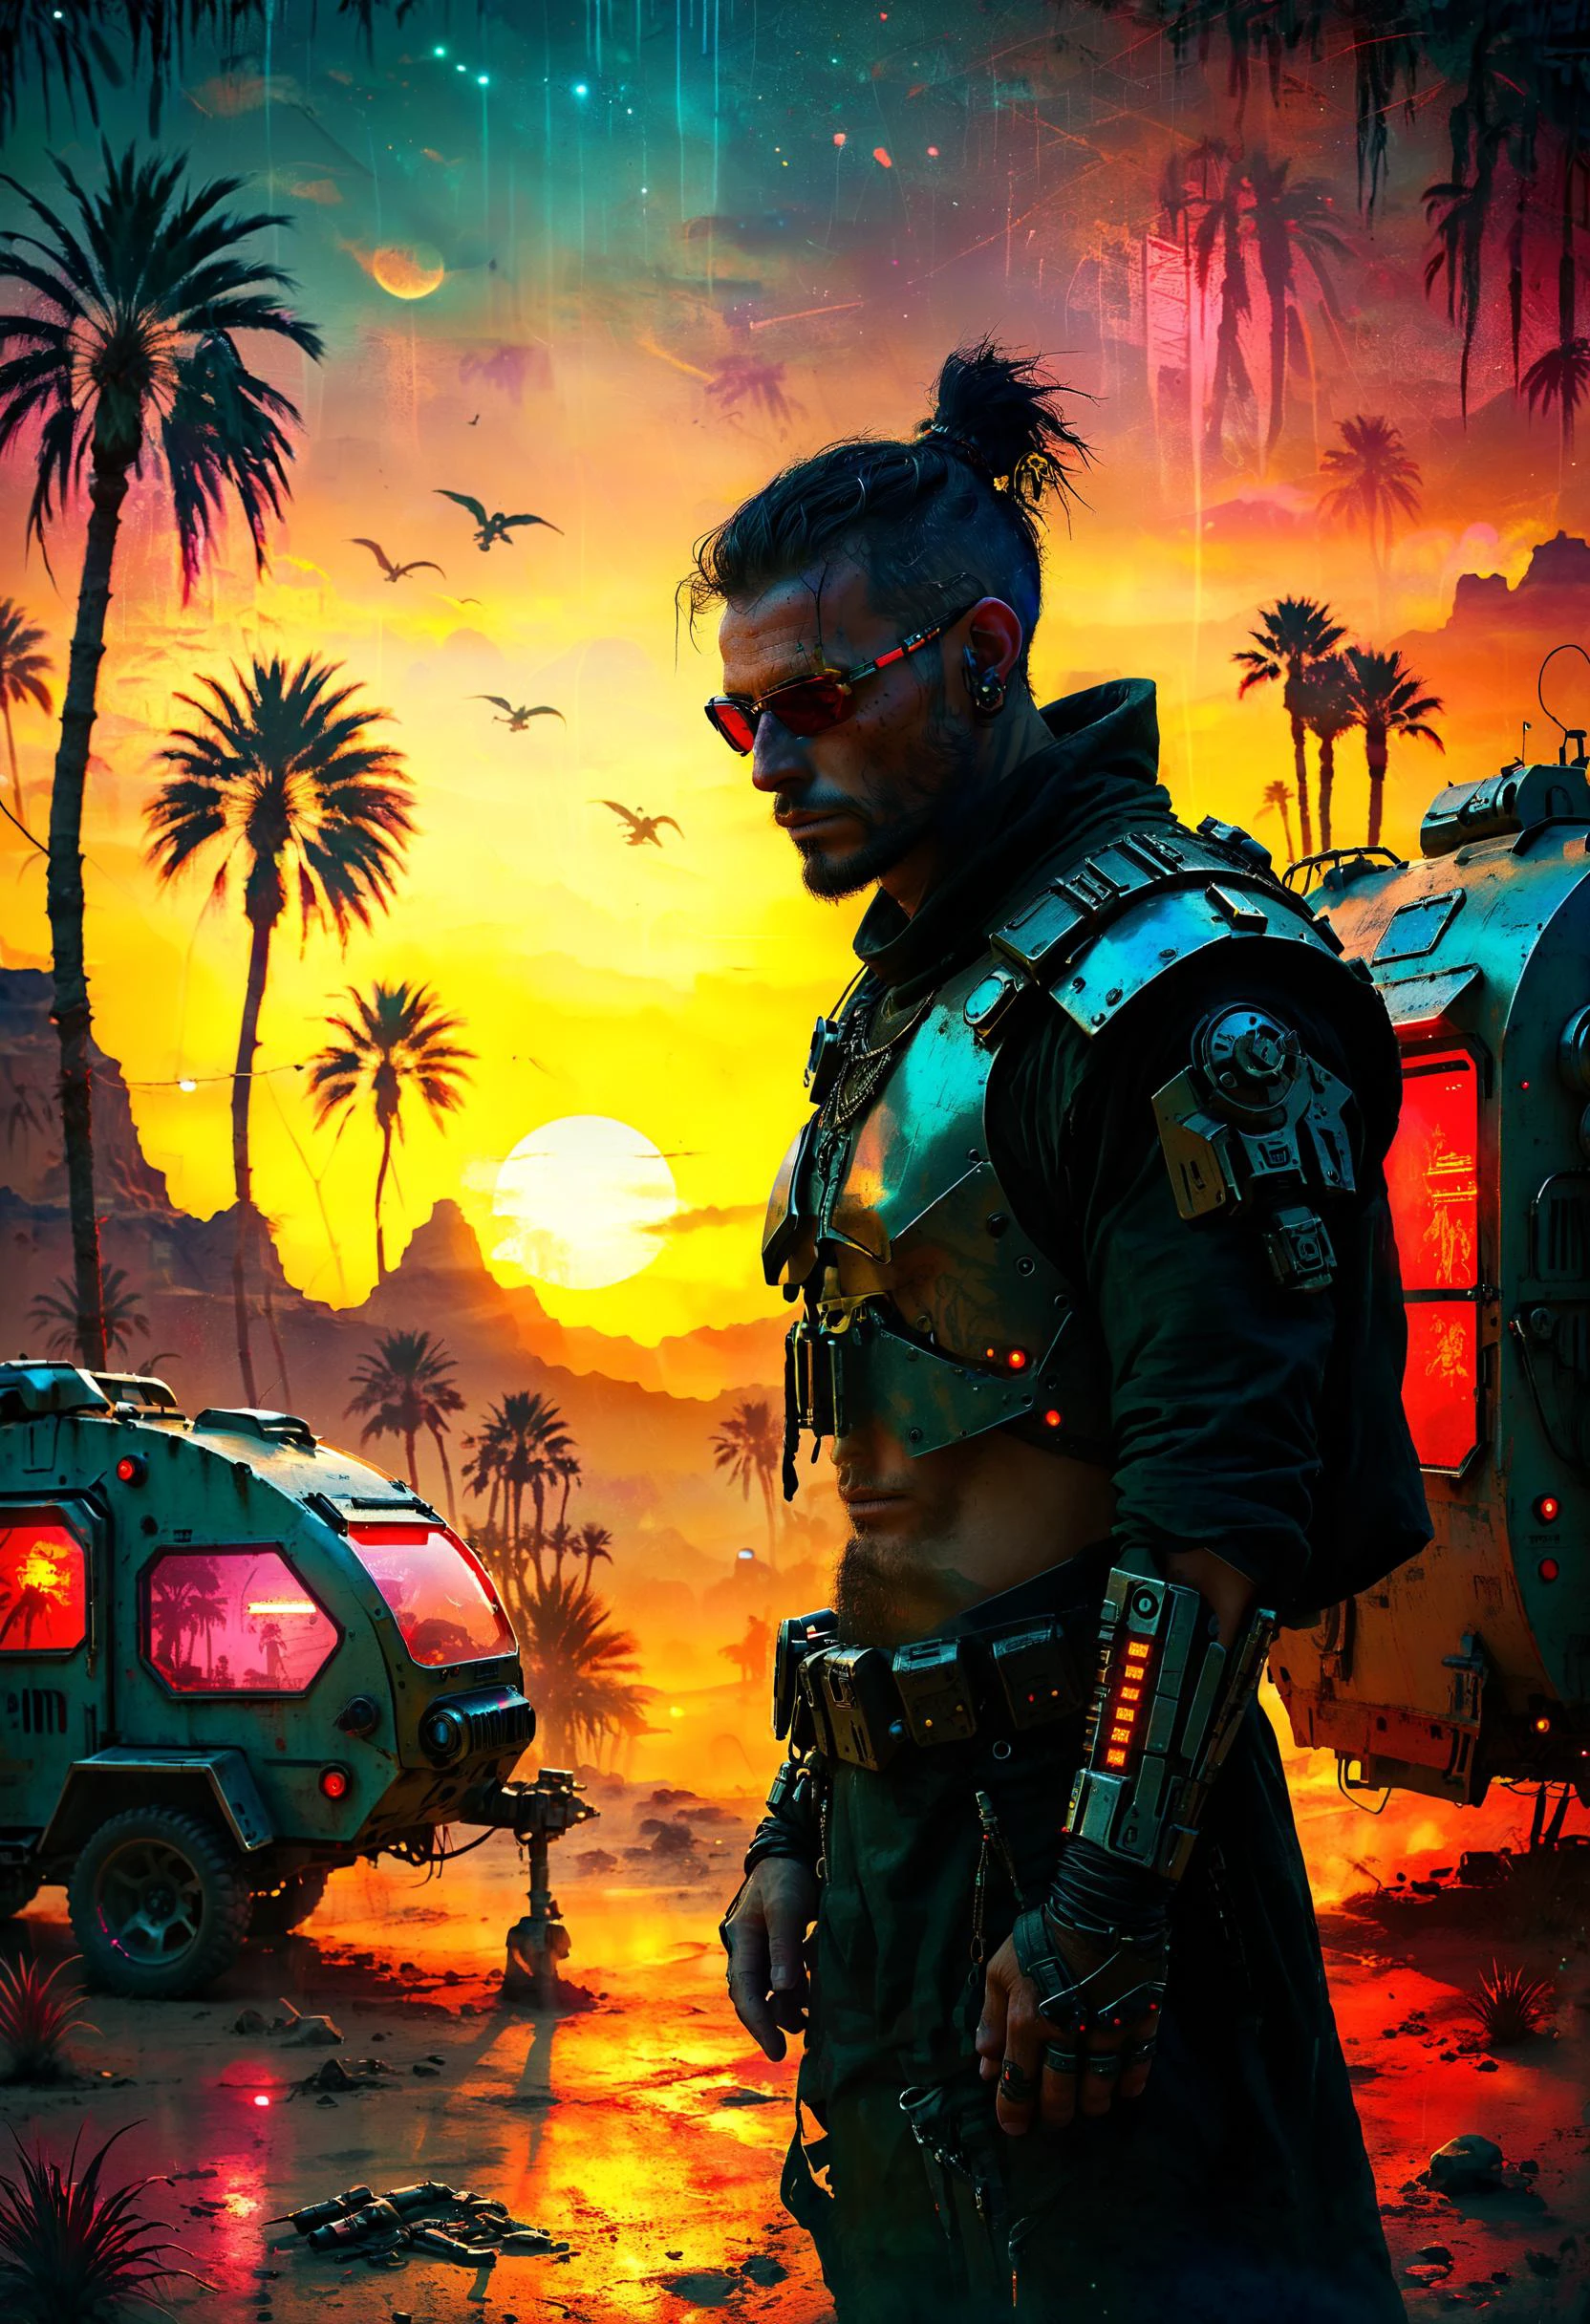 evil villain Cyberpunk nomad trader with robotic caravan, outrageous fashion, Desert oasis with palm trees in the background, Flickering light, sharp focus, highly detailed